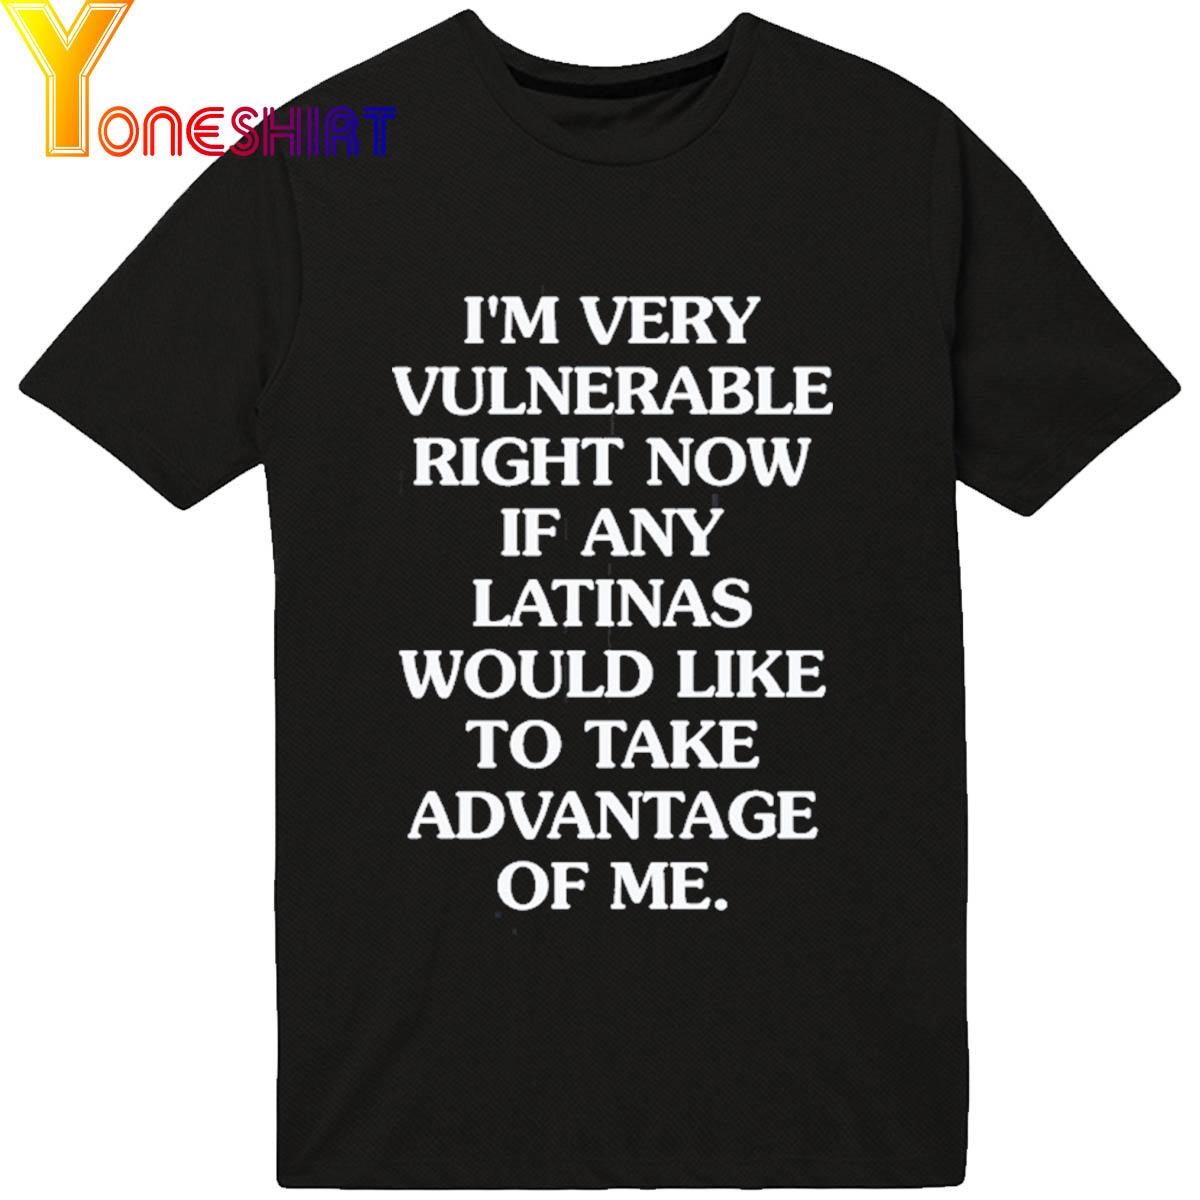 I'm Very Vulnerable Right Now If Any Latinas Would Like To Take Advantage Of Me shirt